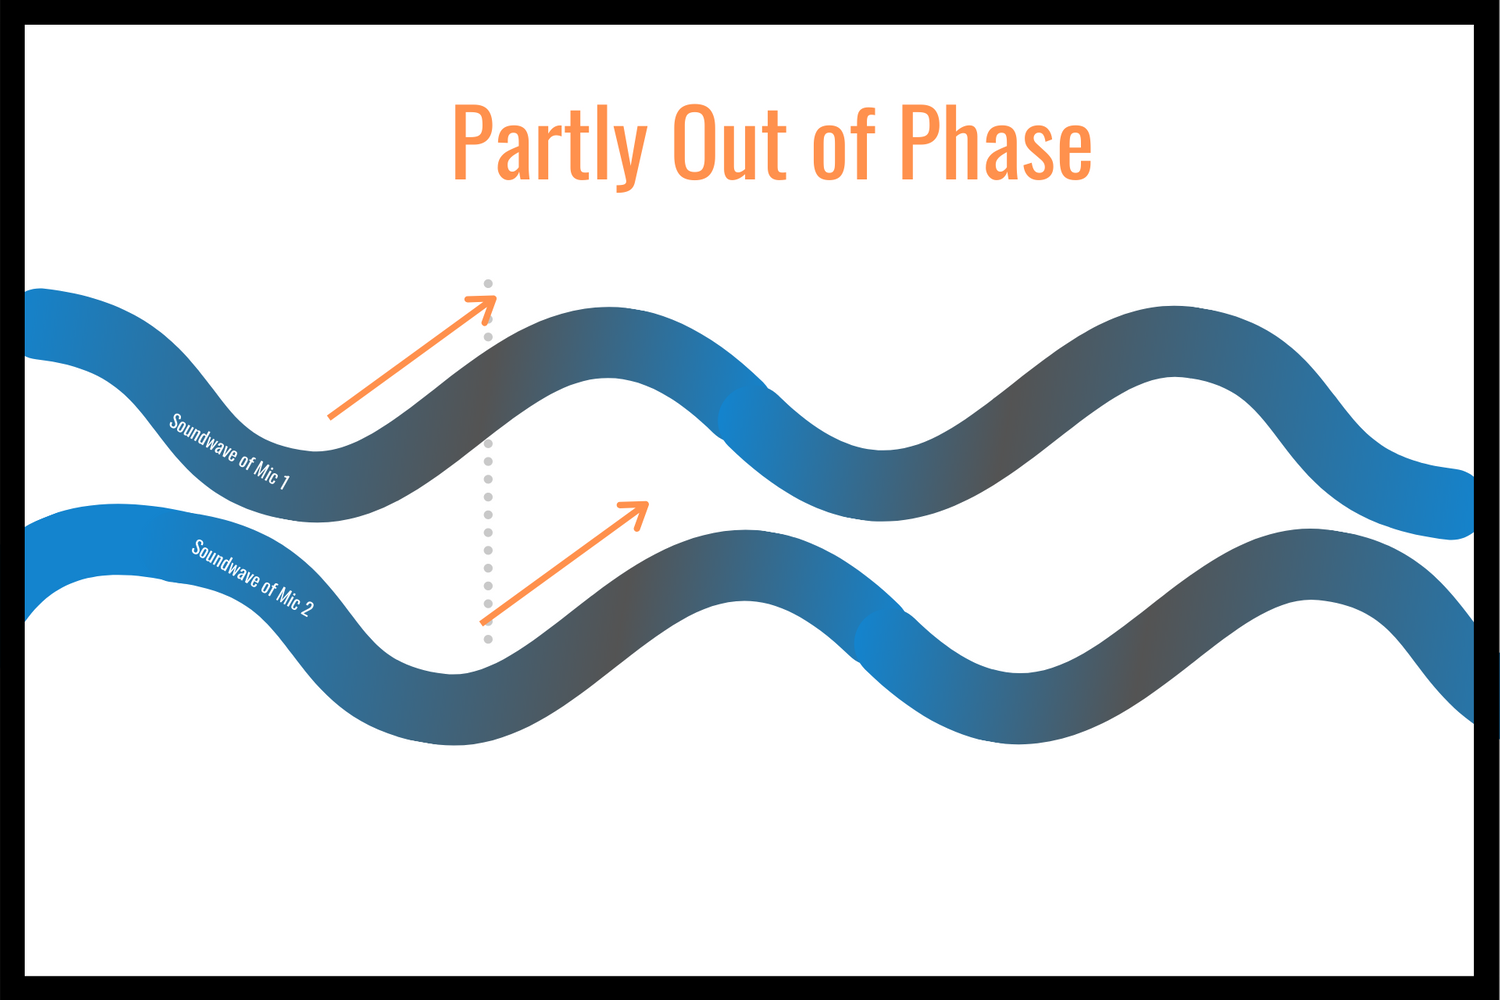 Partly Out of Phase